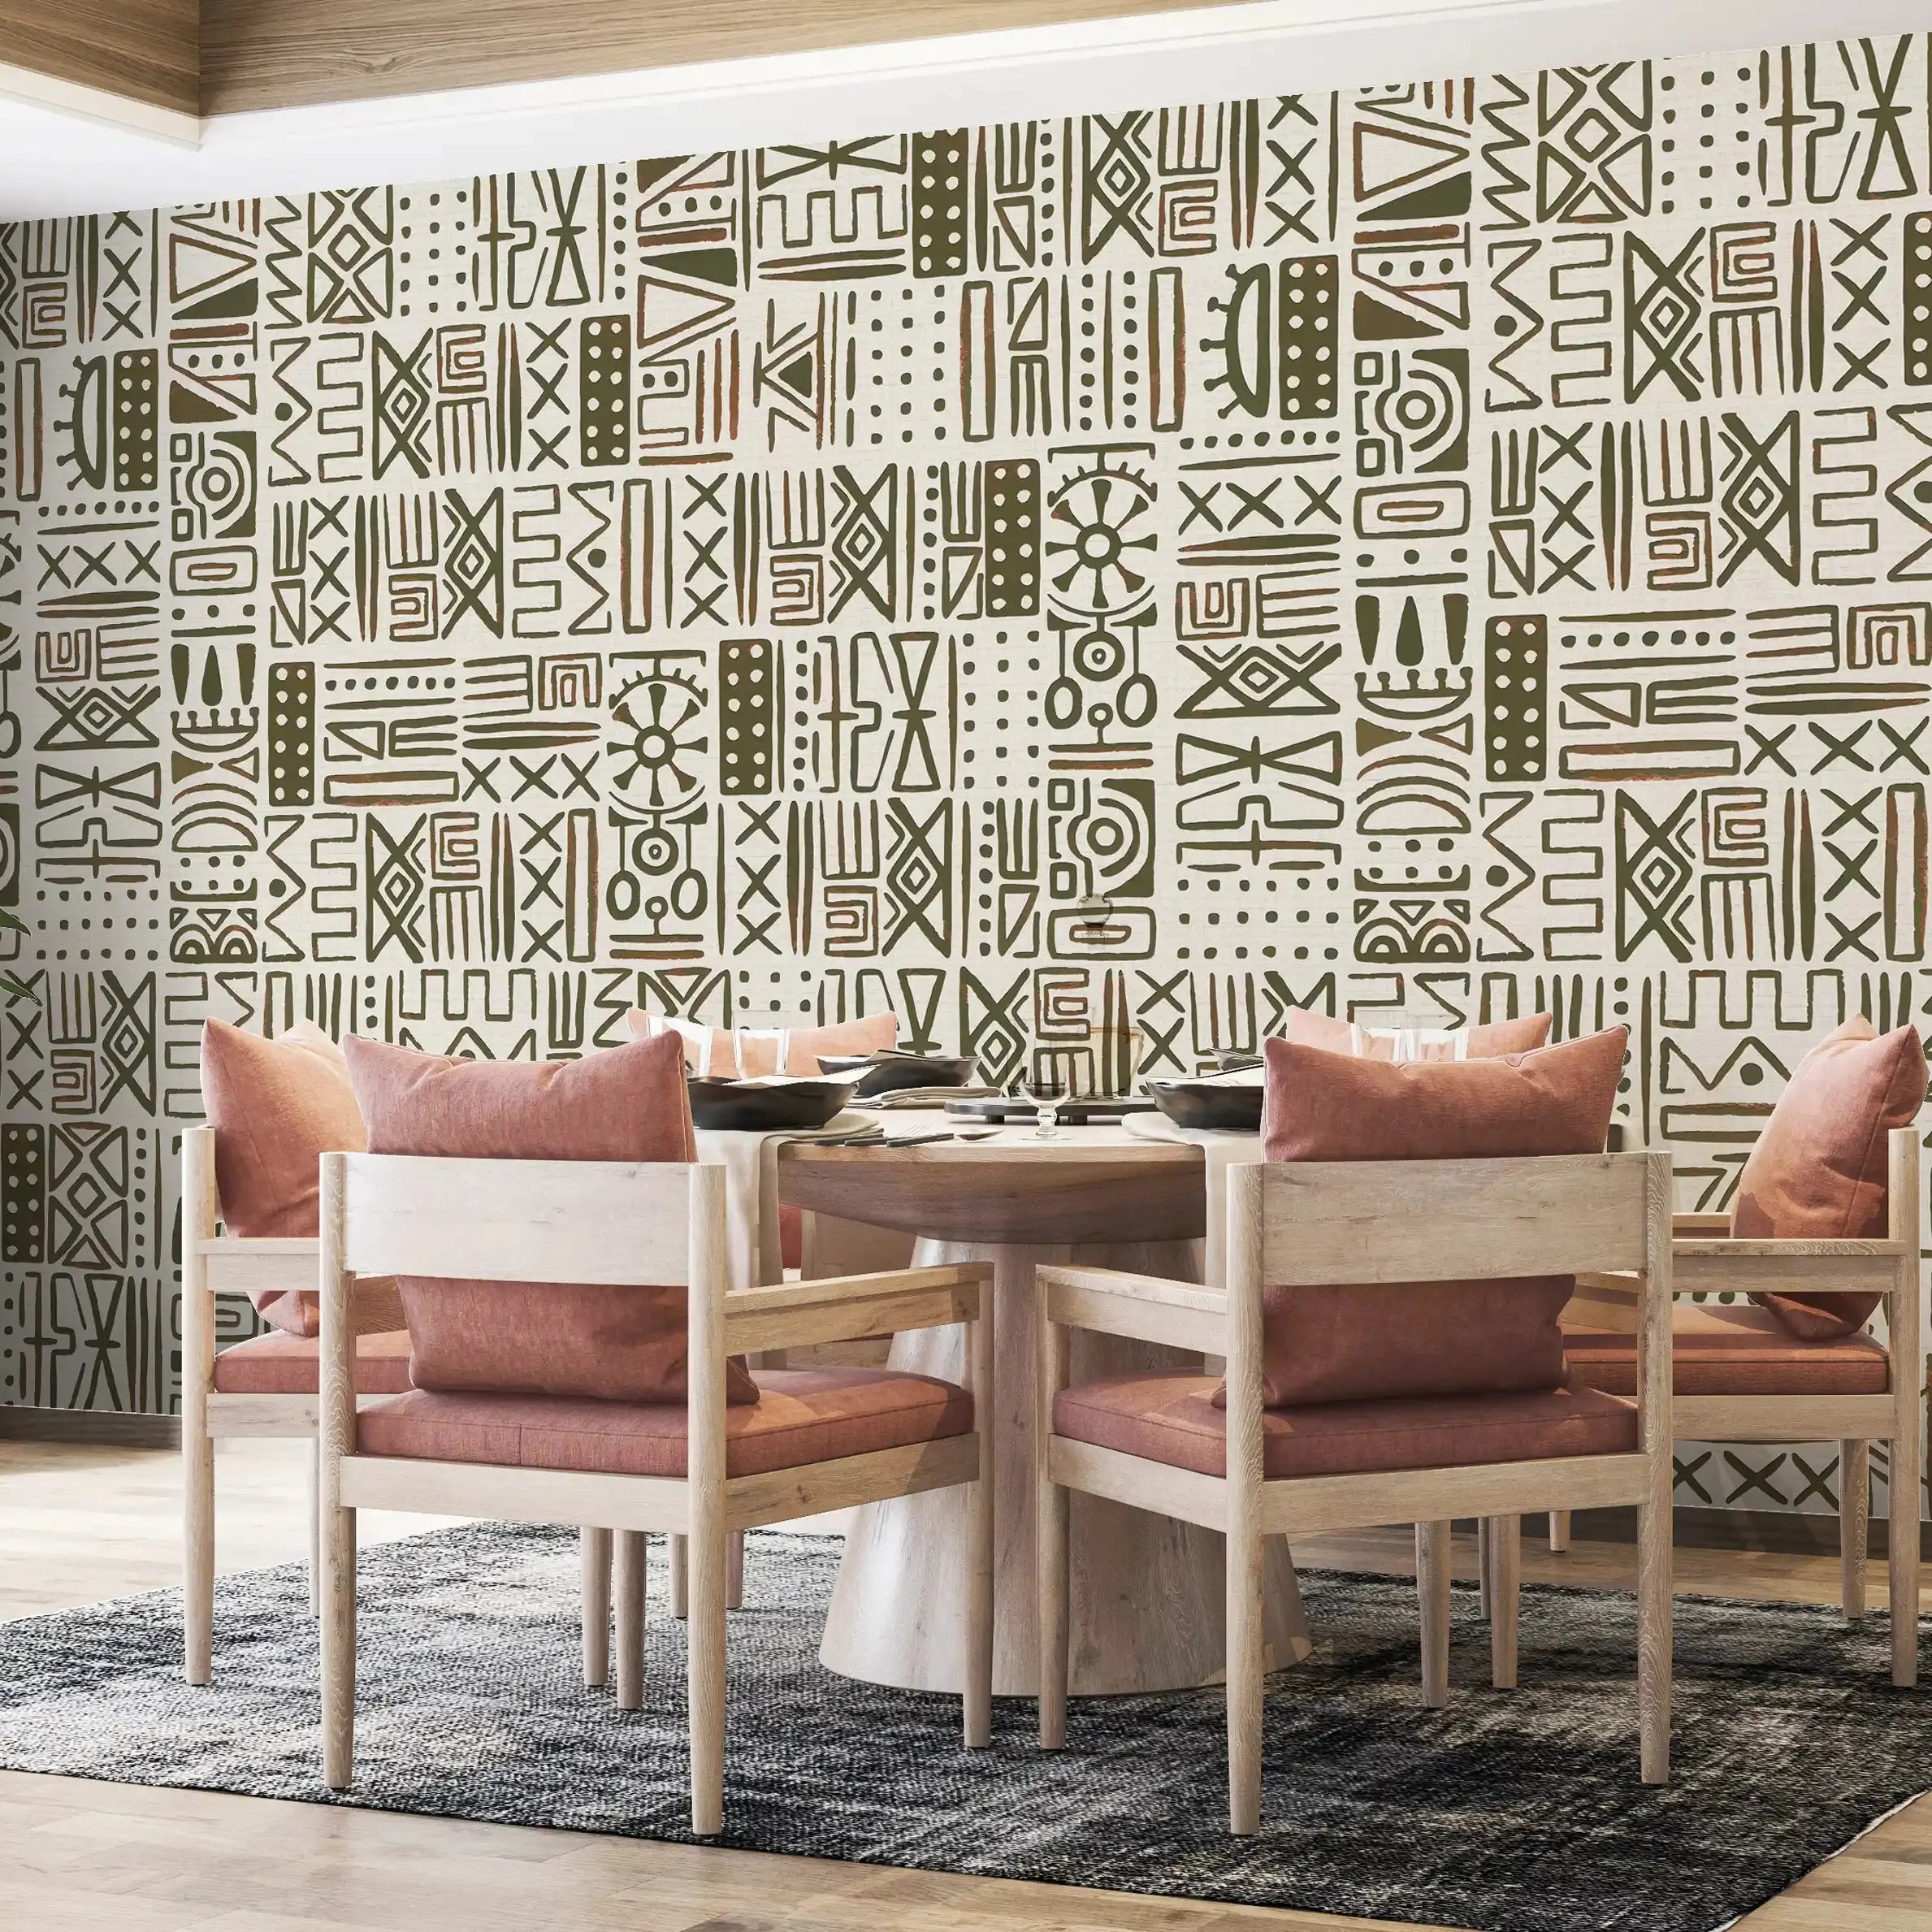 3030-C / African Inspired Peel and Stick Wallpaper, Geometric Khaki and Beige Patterns Wall Mural - Artevella